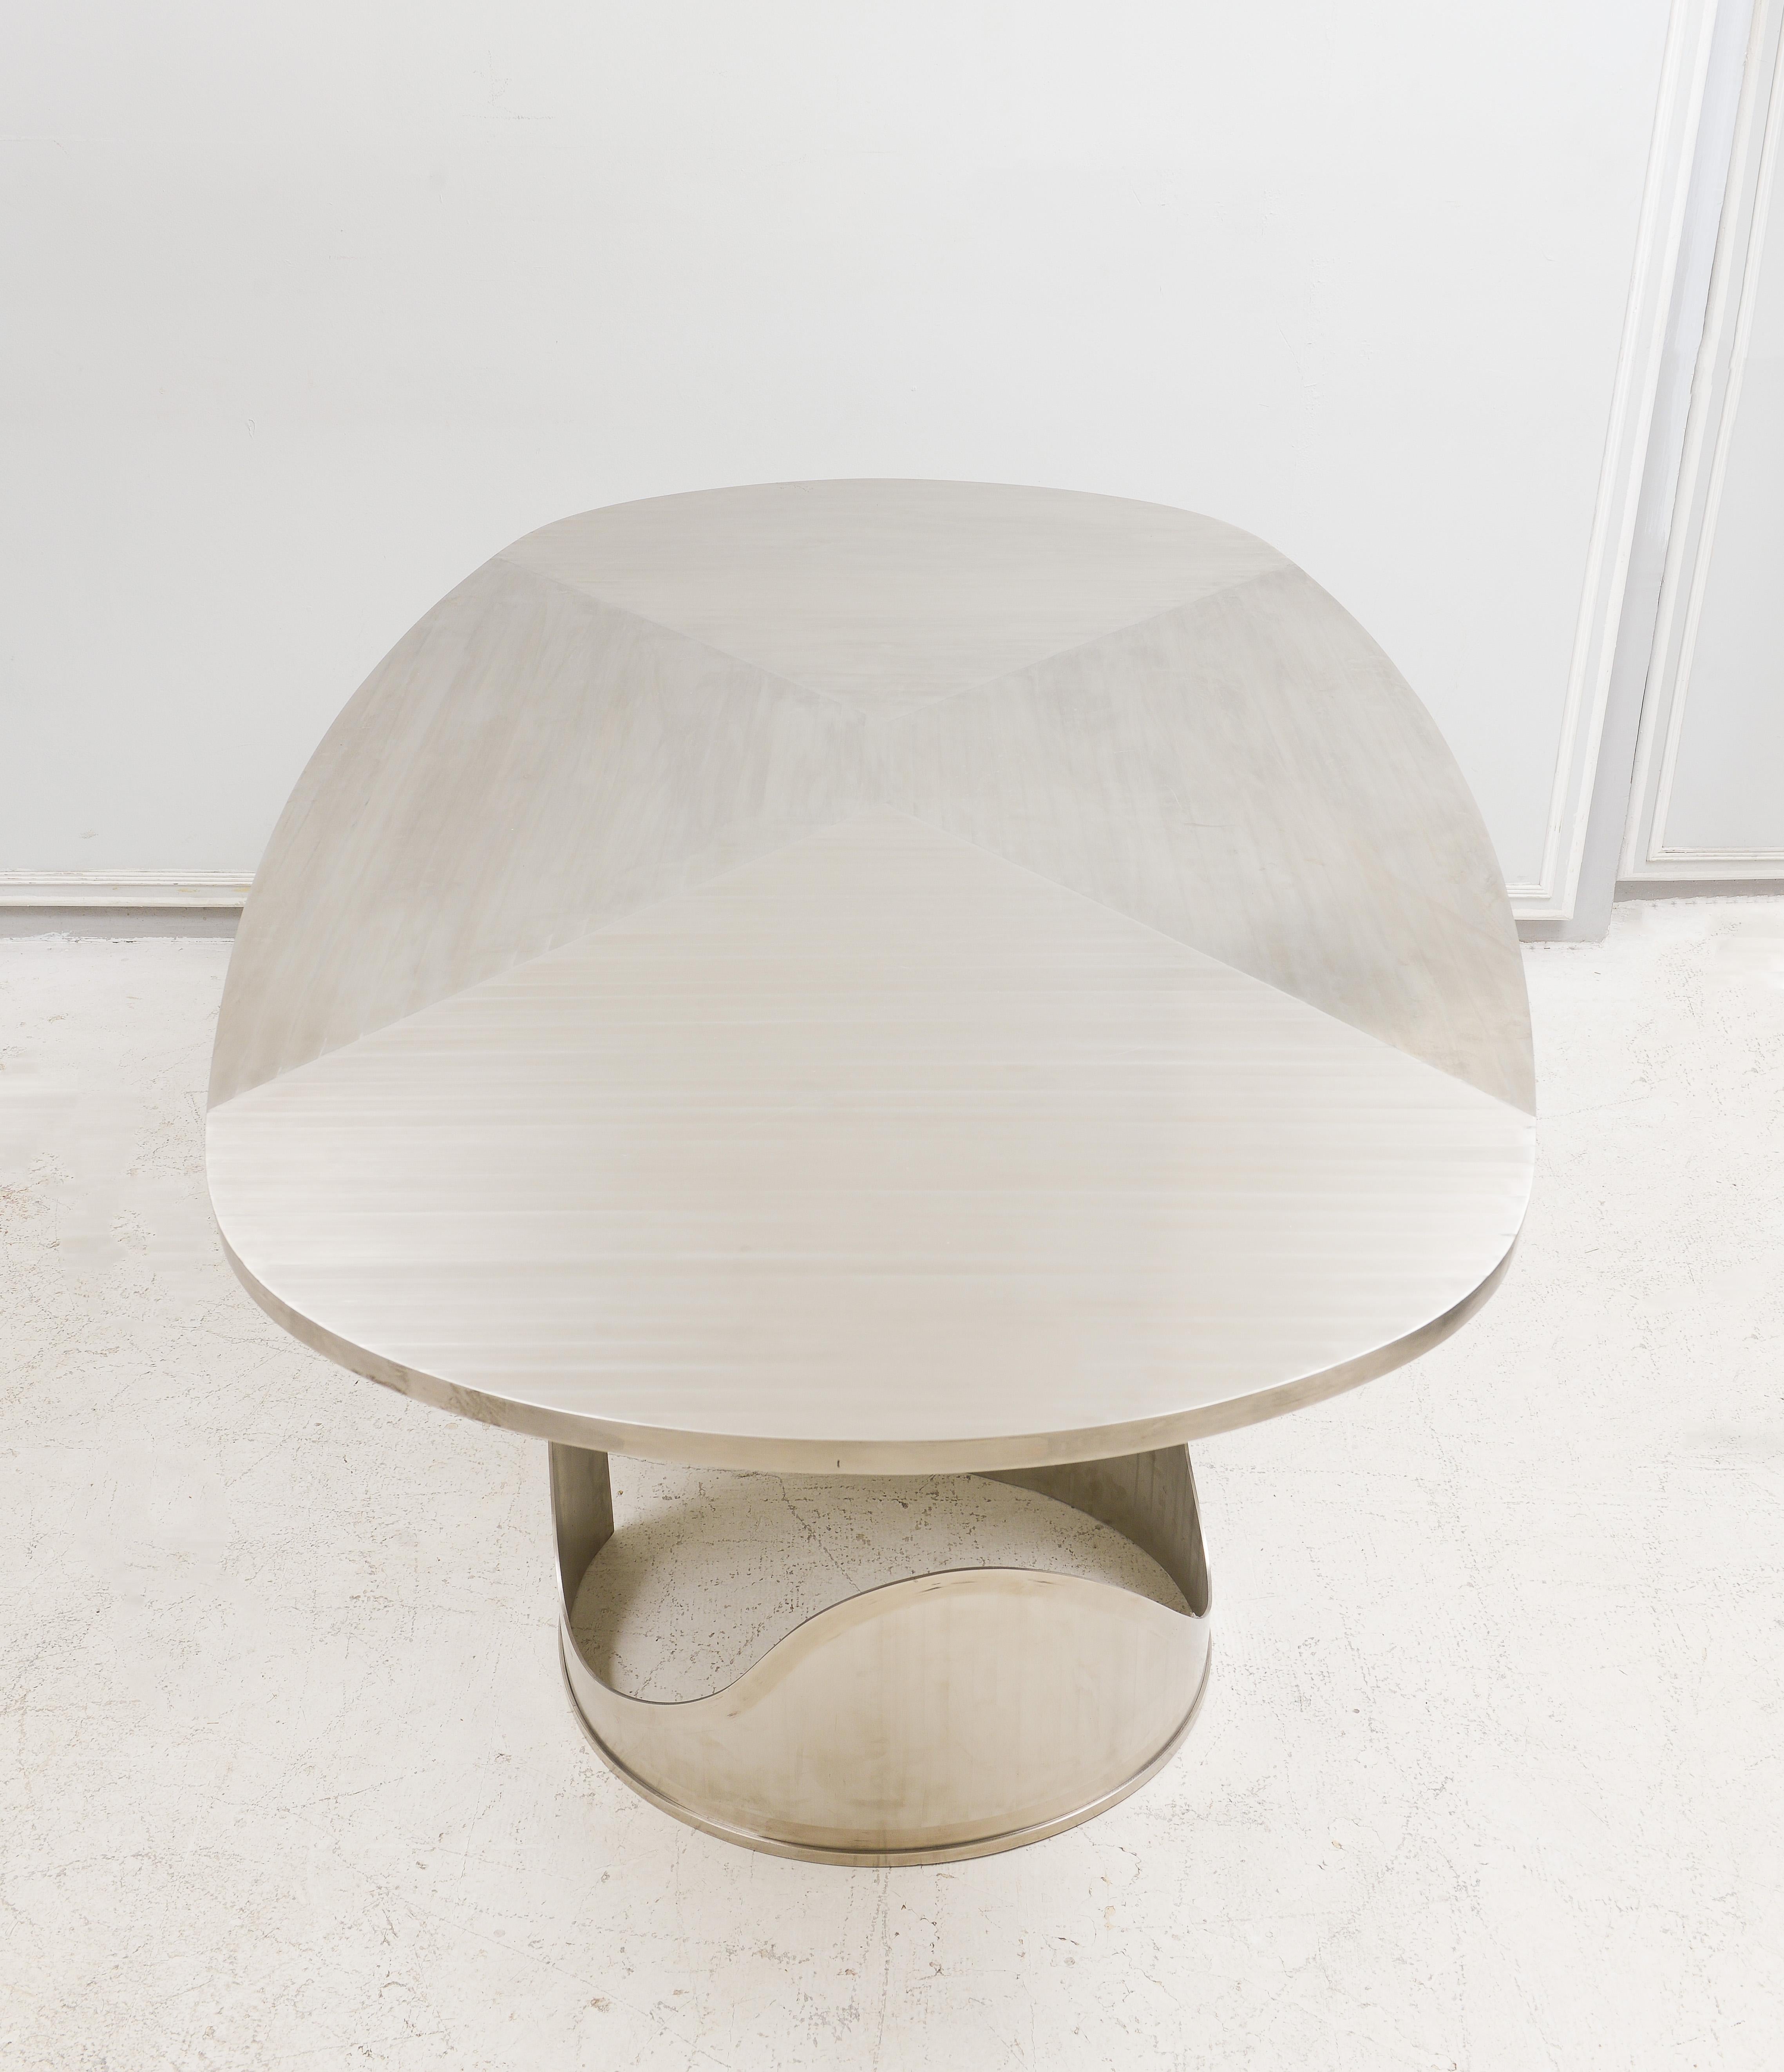 Contemporary Sculptural Stainless Steel Table in the Manner of Maria Pergay For Sale